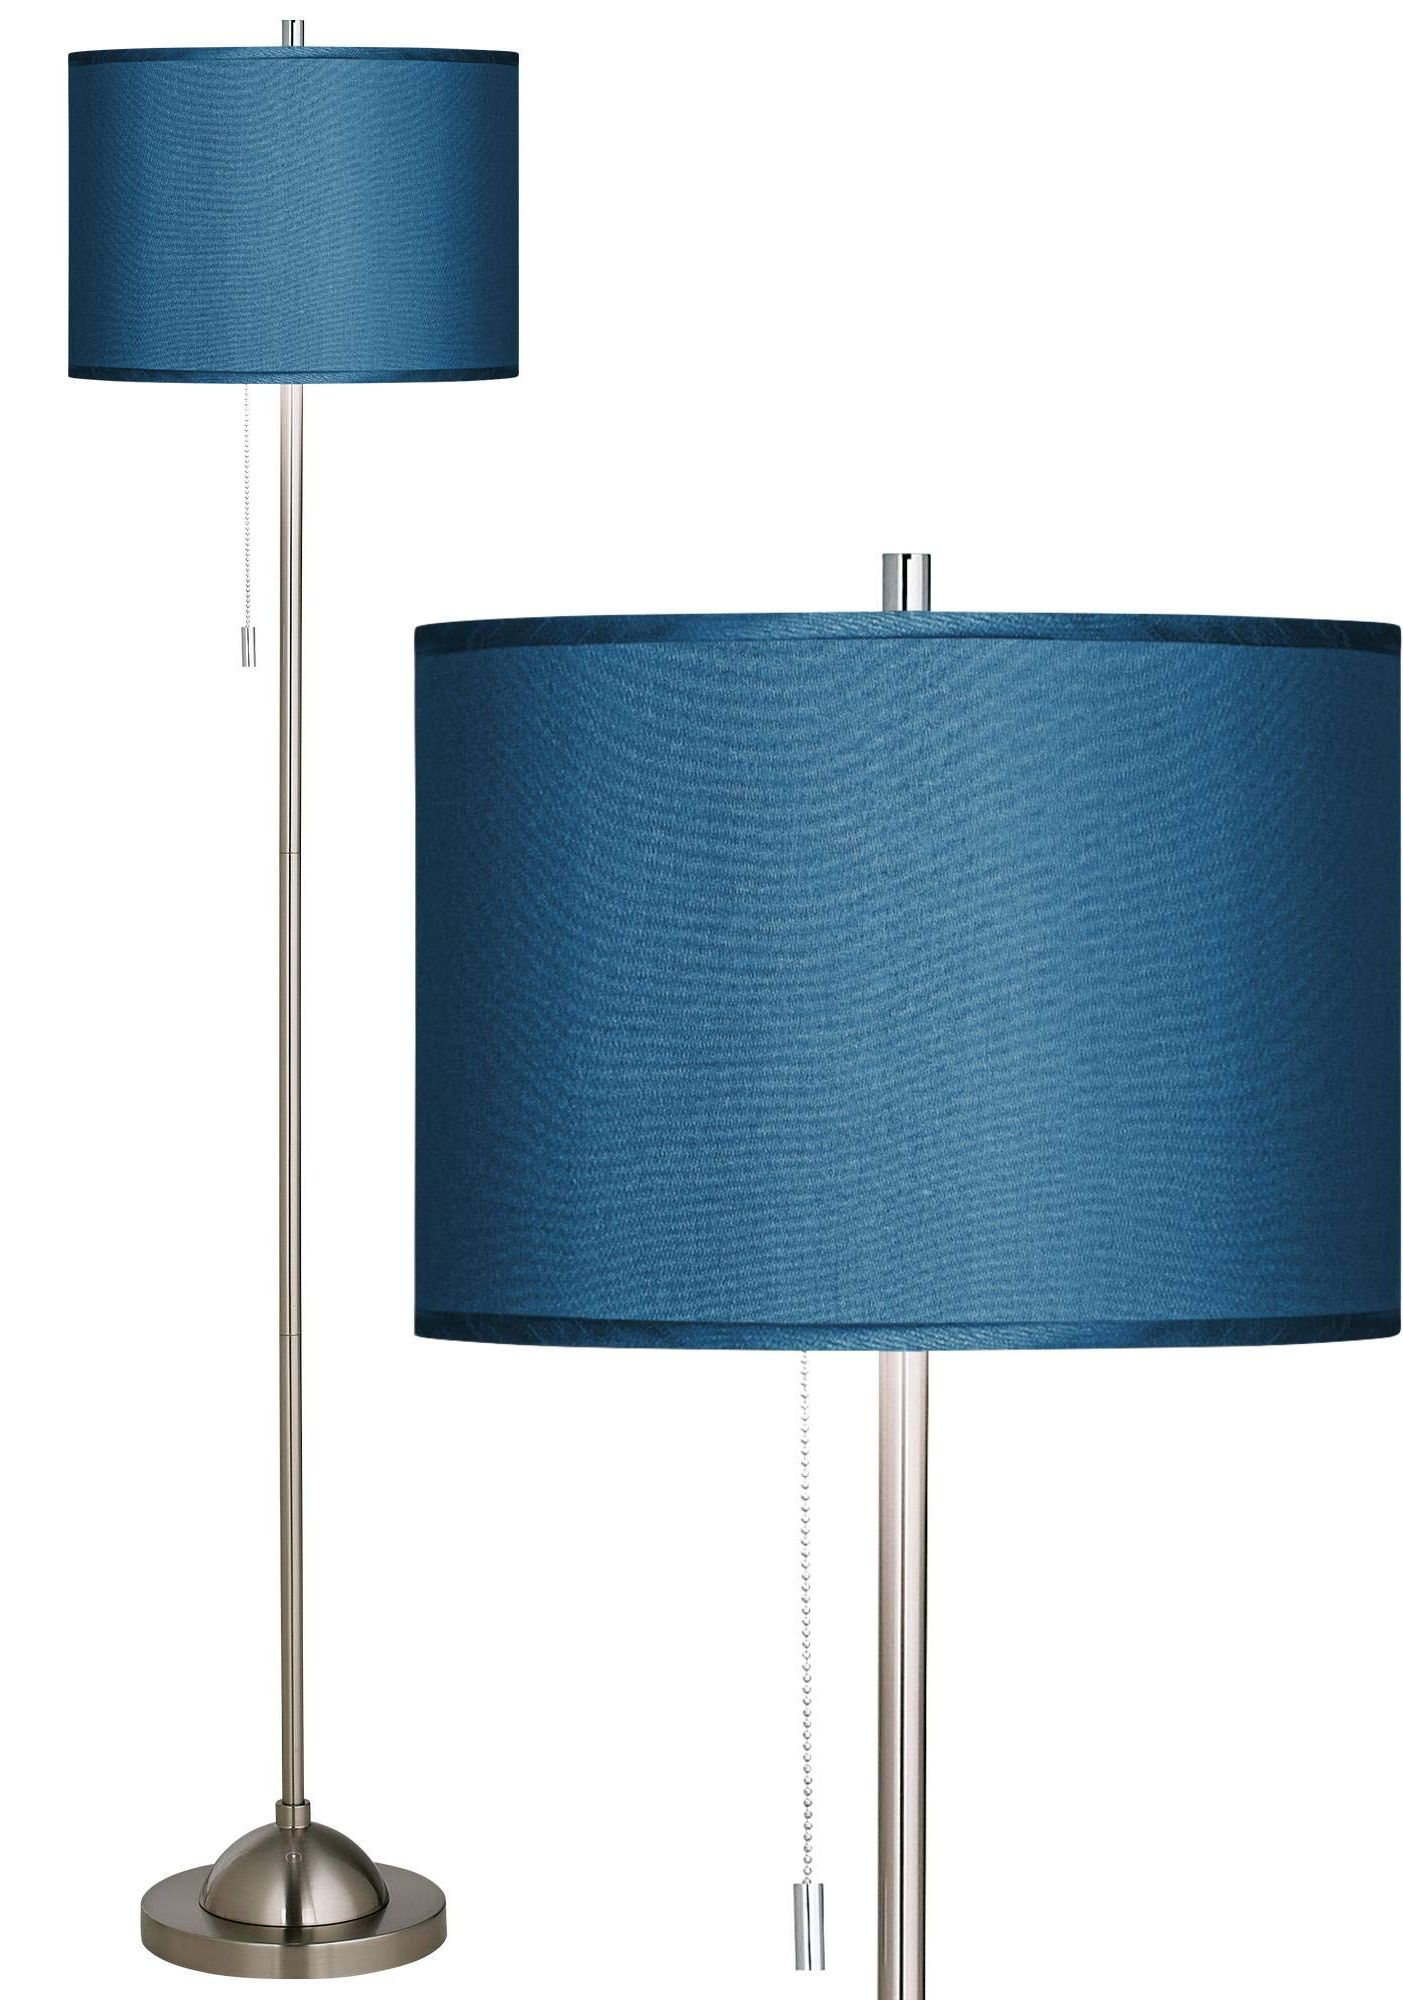 Blue Standing Lamps Regarding Trendy Possini Euro Design Modern Minimalist Pole Lamp Floor Standing Thin 62"  Tall Brushed Nickel Silver Blue Textured Fabric Drum Shade Decor For Living  Room Reading House Bedroom Home – – Amazon (View 2 of 15)